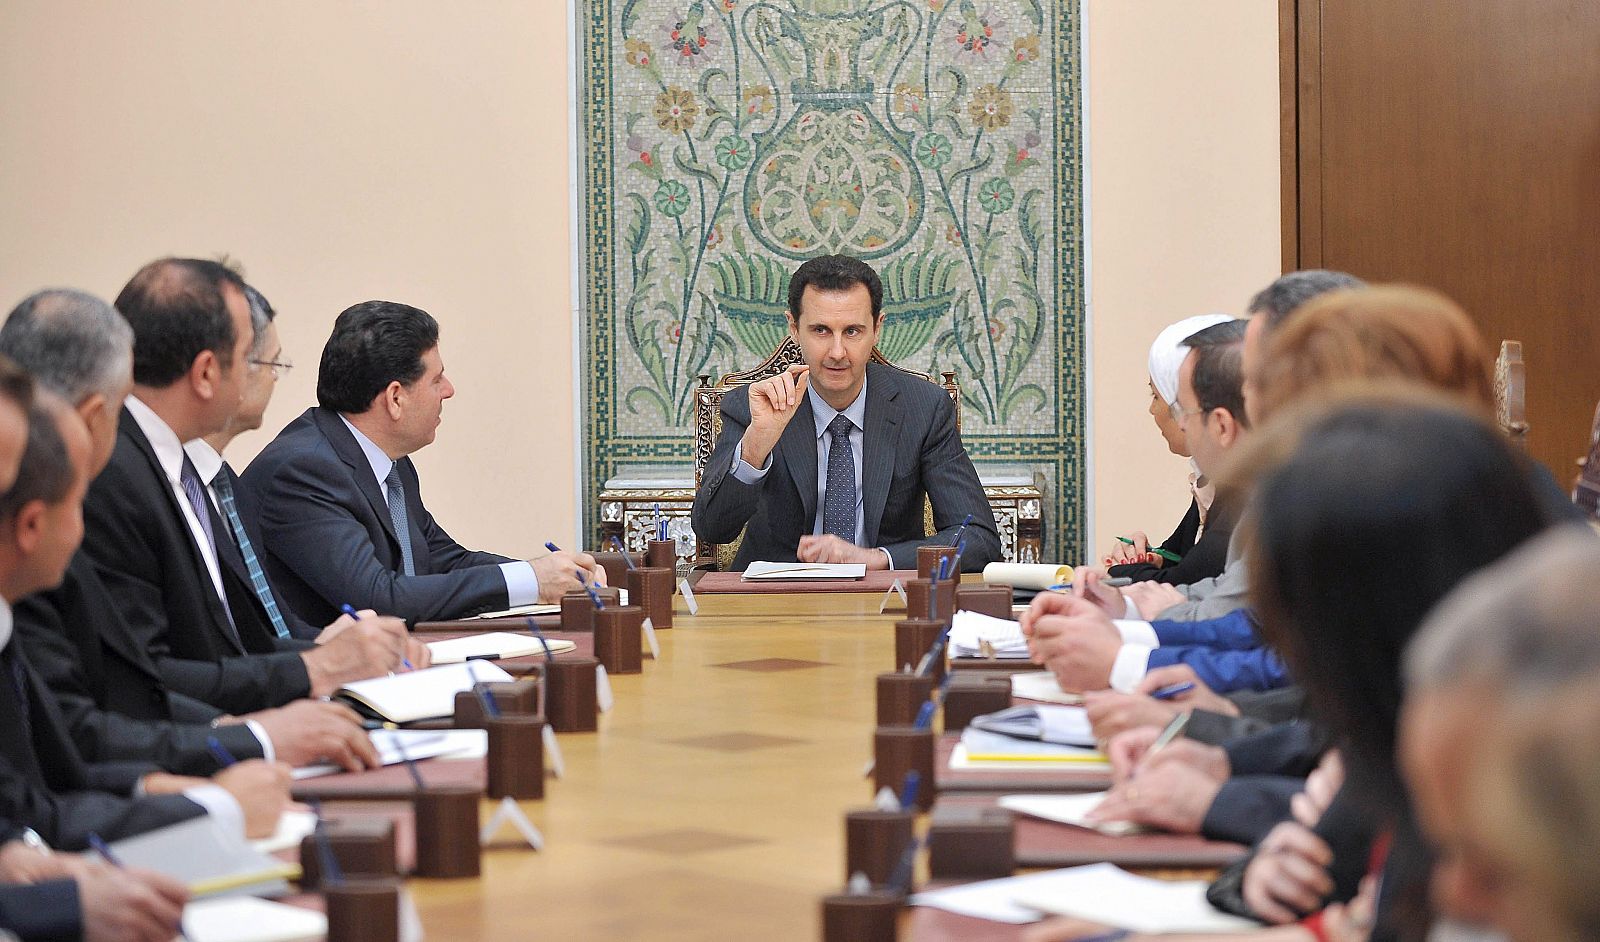 Syrian President Bashar al-Assad meets with members of the Higher Committee for Relief